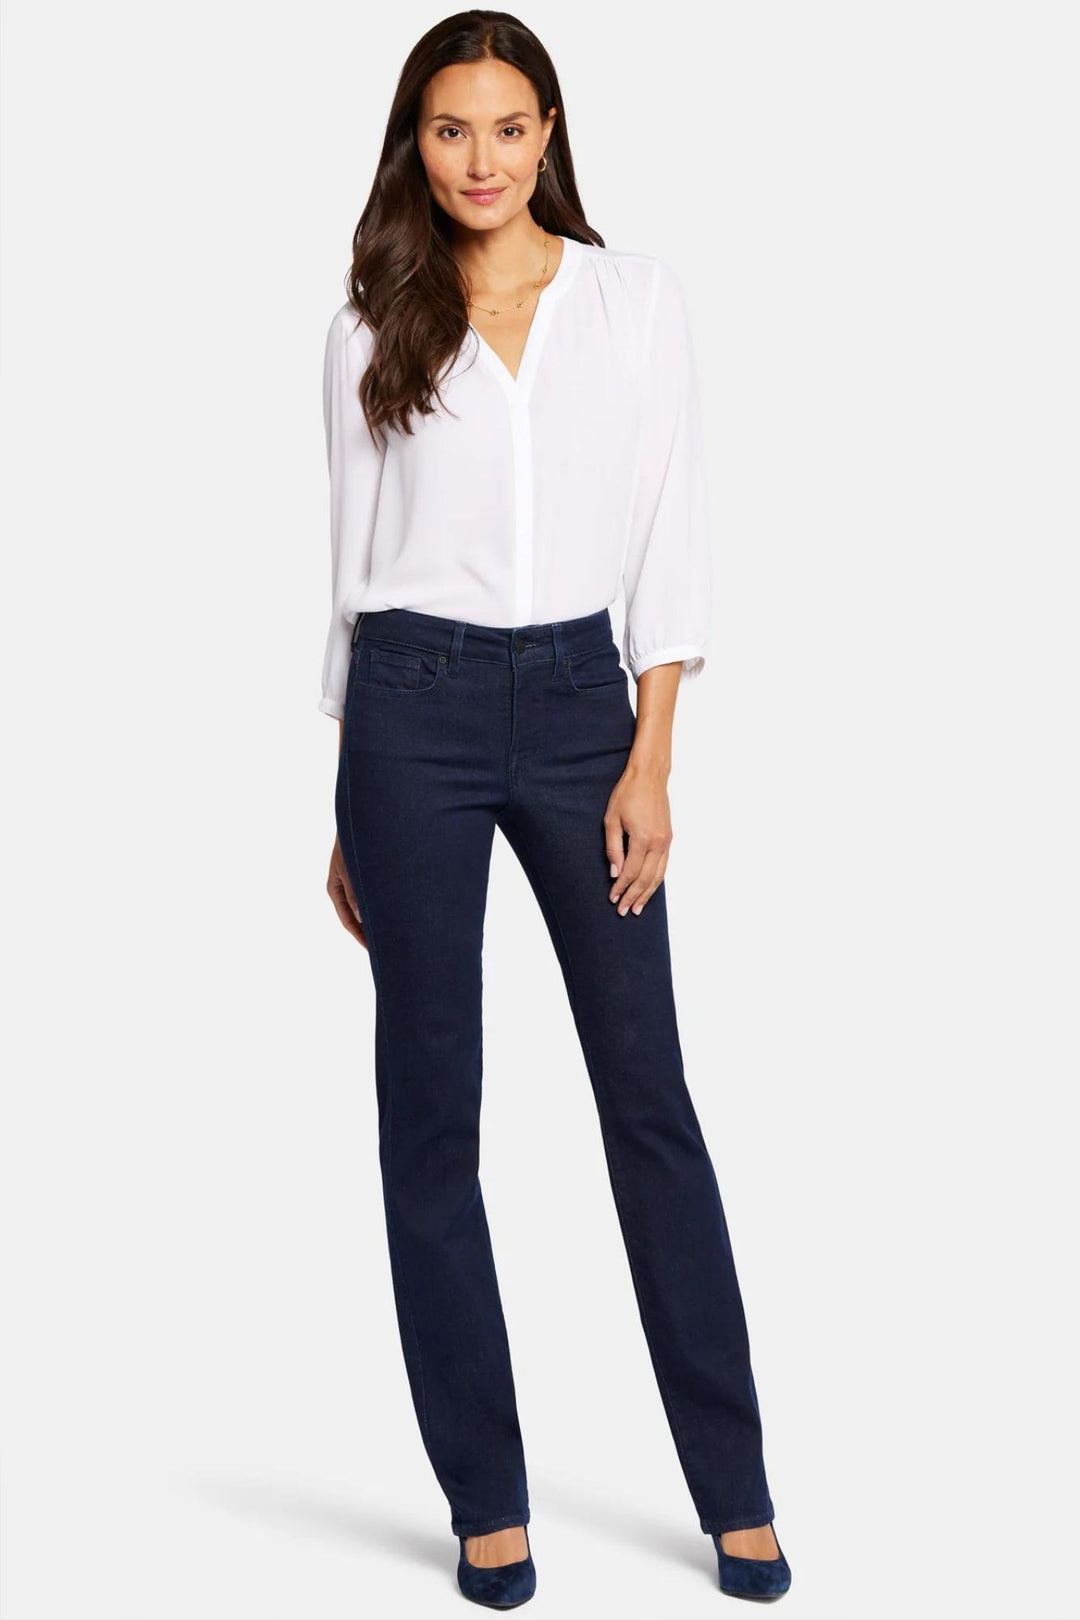 NYDJ Marilyn MPRIMS8517 Blue Rinse Straight Leg Jeans - Experience Boutique